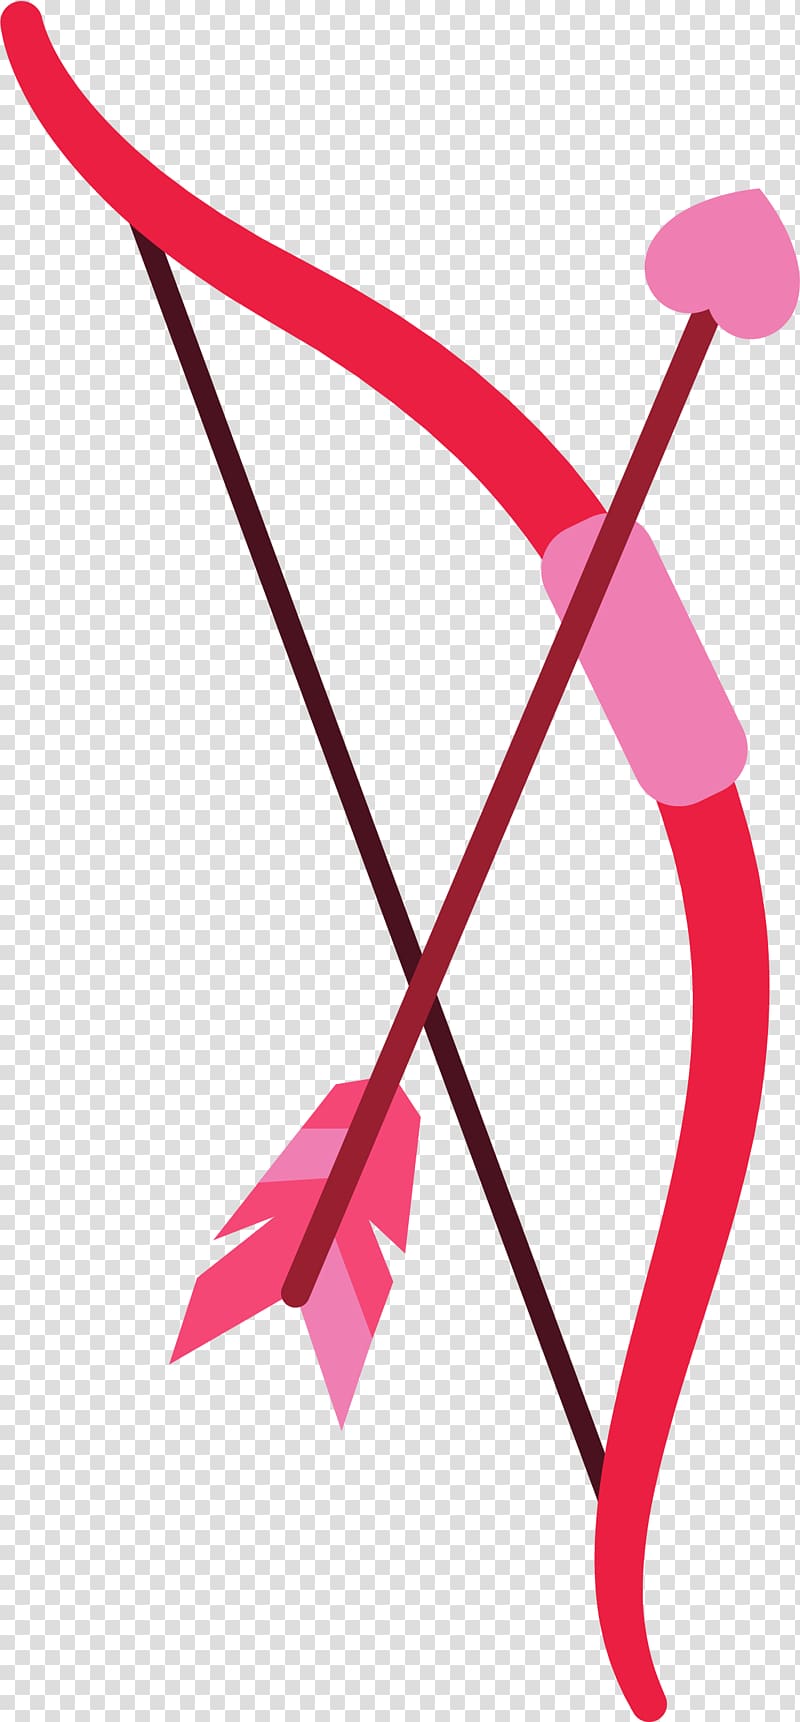 Bow and arrow Bow and arrow, Hand painted colorful bow arrow transparent background PNG clipart